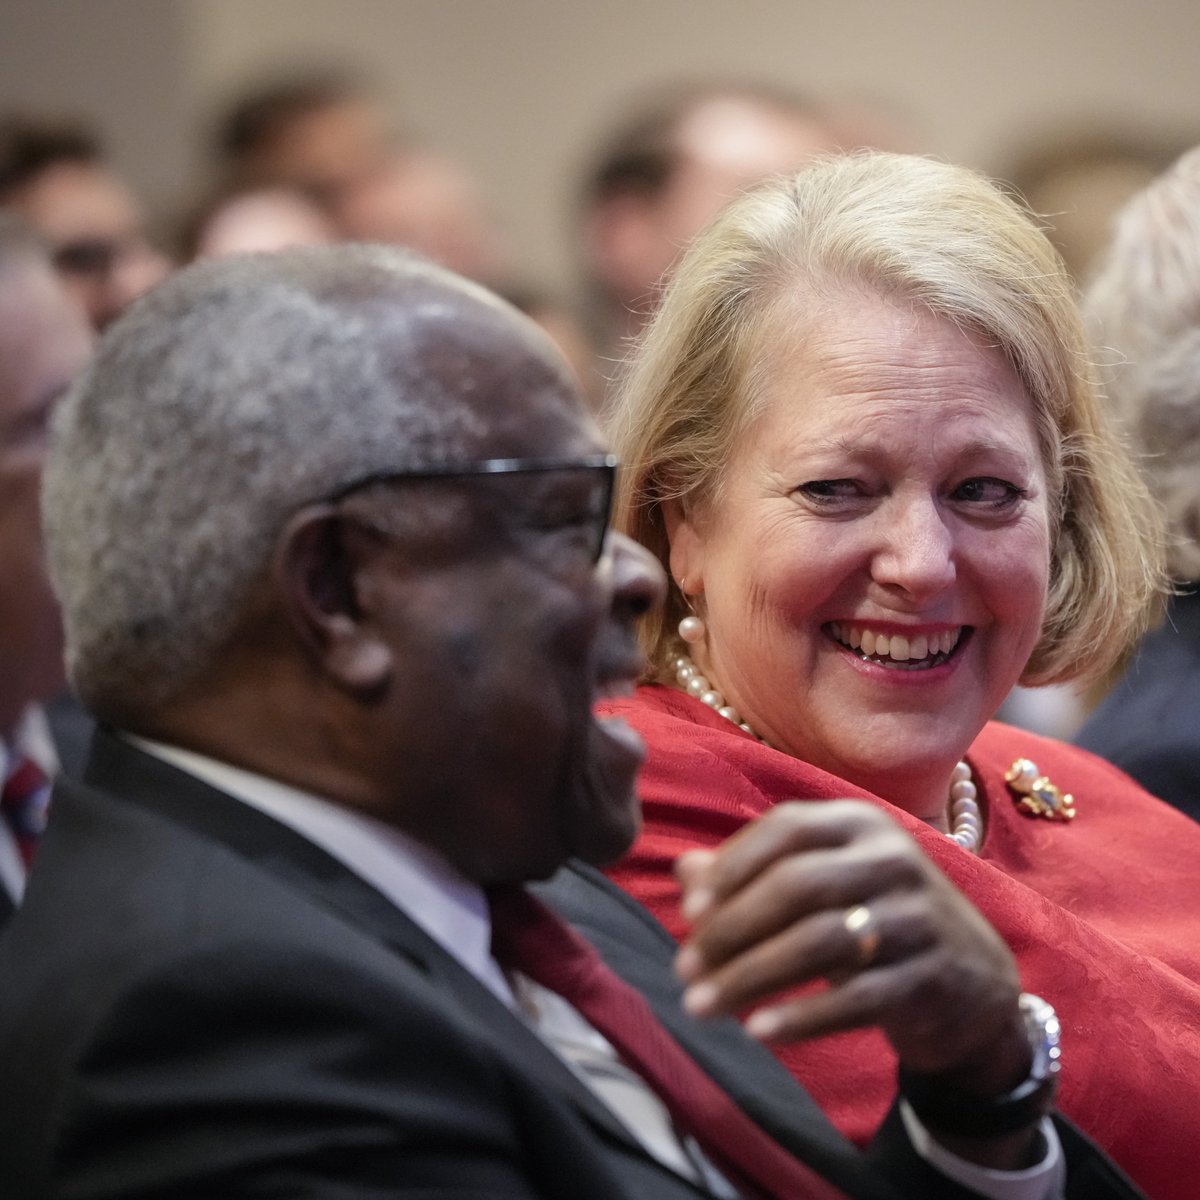 BREAKING: A Conservative activist group led by SCOTUS Justice Clarence Thomas' wife Ginni Thomas has received almost $600,000 in anonymous donations to wage cultural wars with the Left, according to a Washington Post investigation. Thomas' group, Crowdsourcers for Culture and…